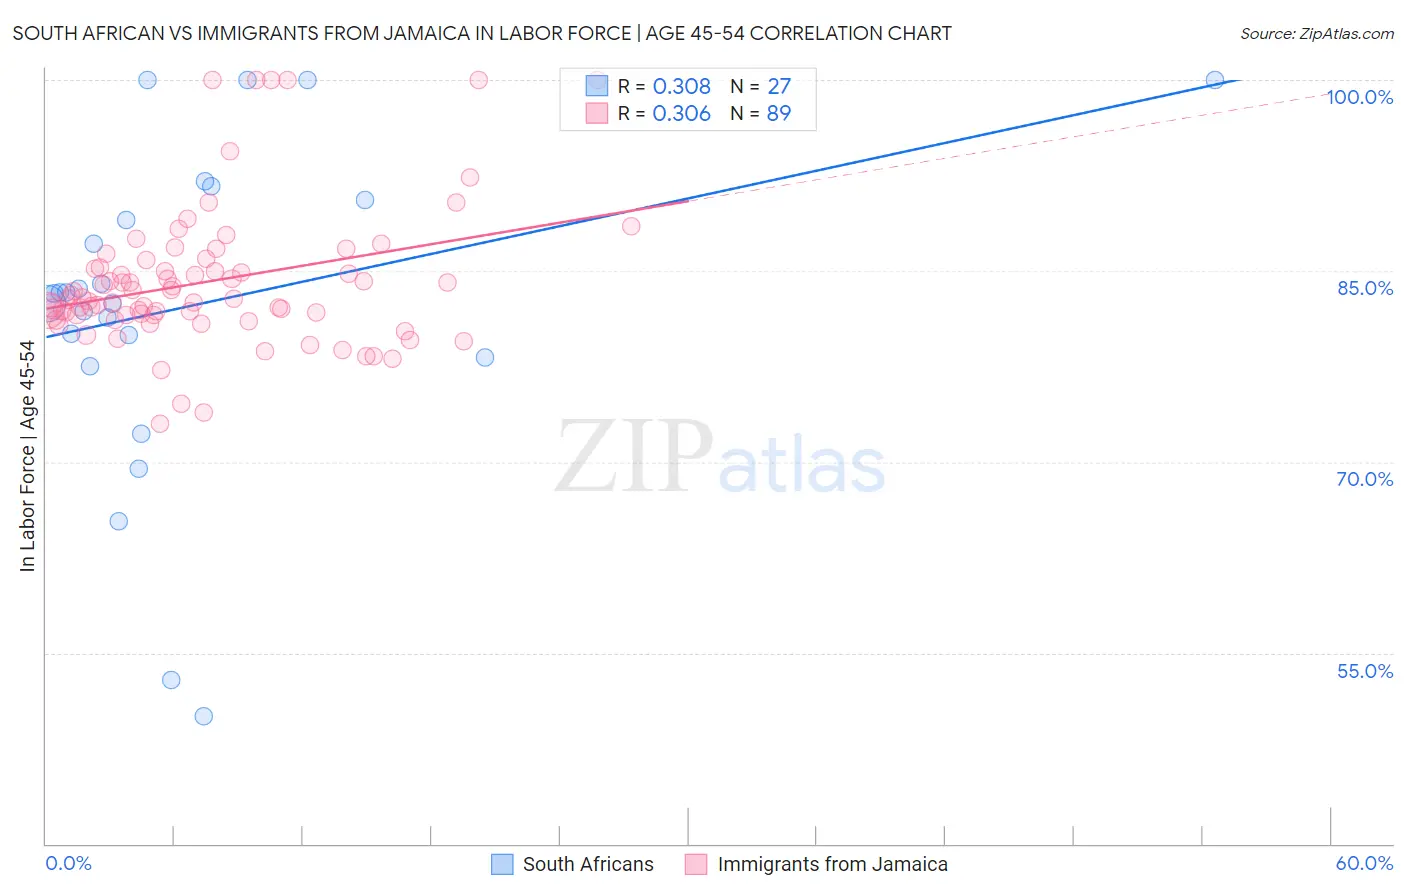 South African vs Immigrants from Jamaica In Labor Force | Age 45-54